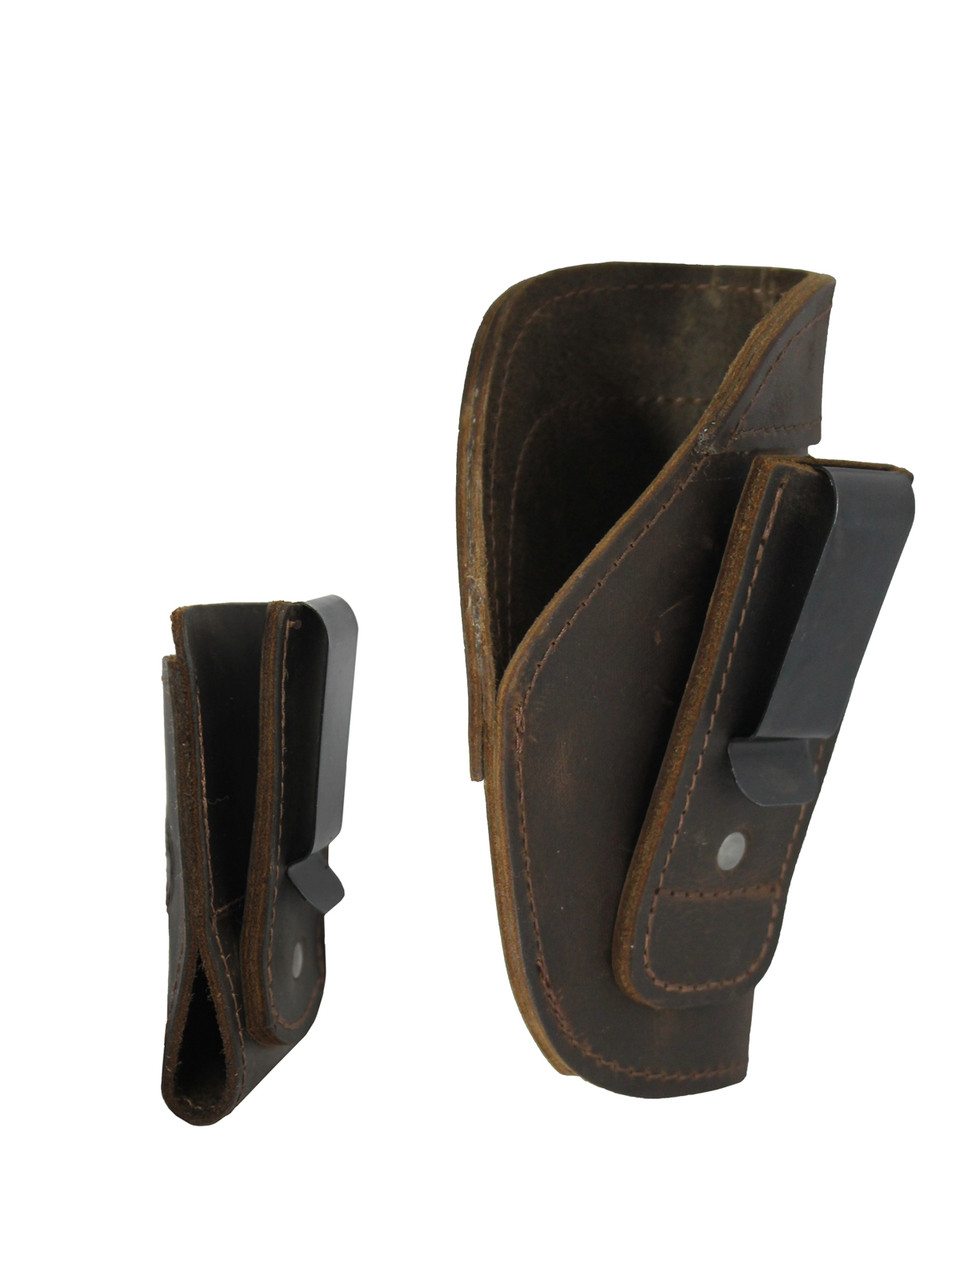 brown leather concealment holster